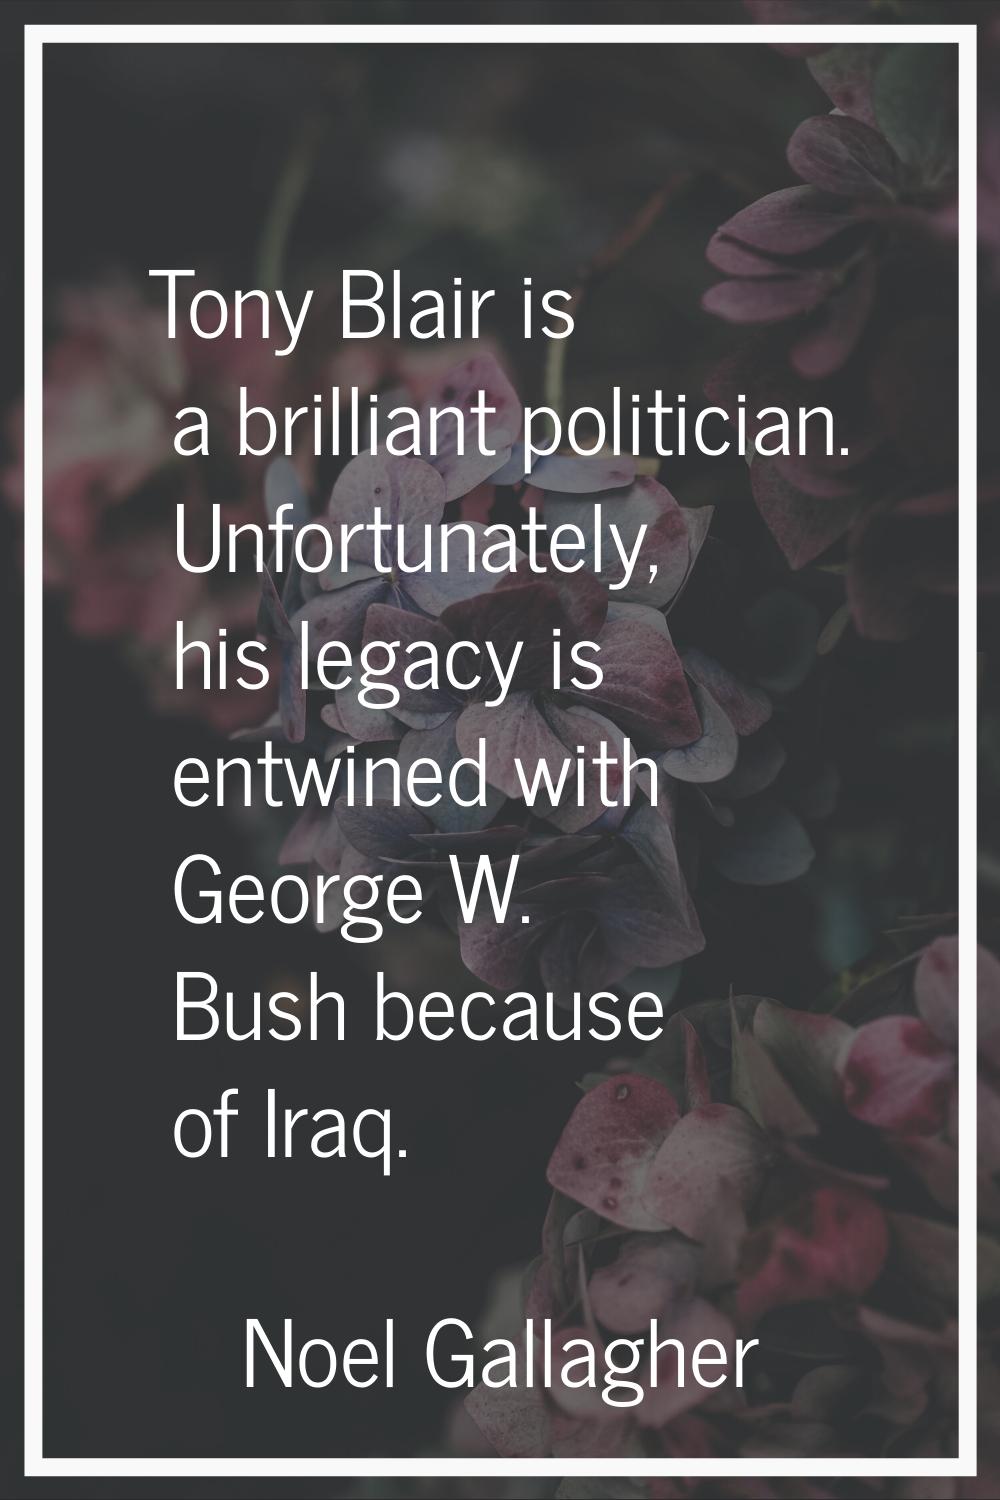 Tony Blair is a brilliant politician. Unfortunately, his legacy is entwined with George W. Bush bec